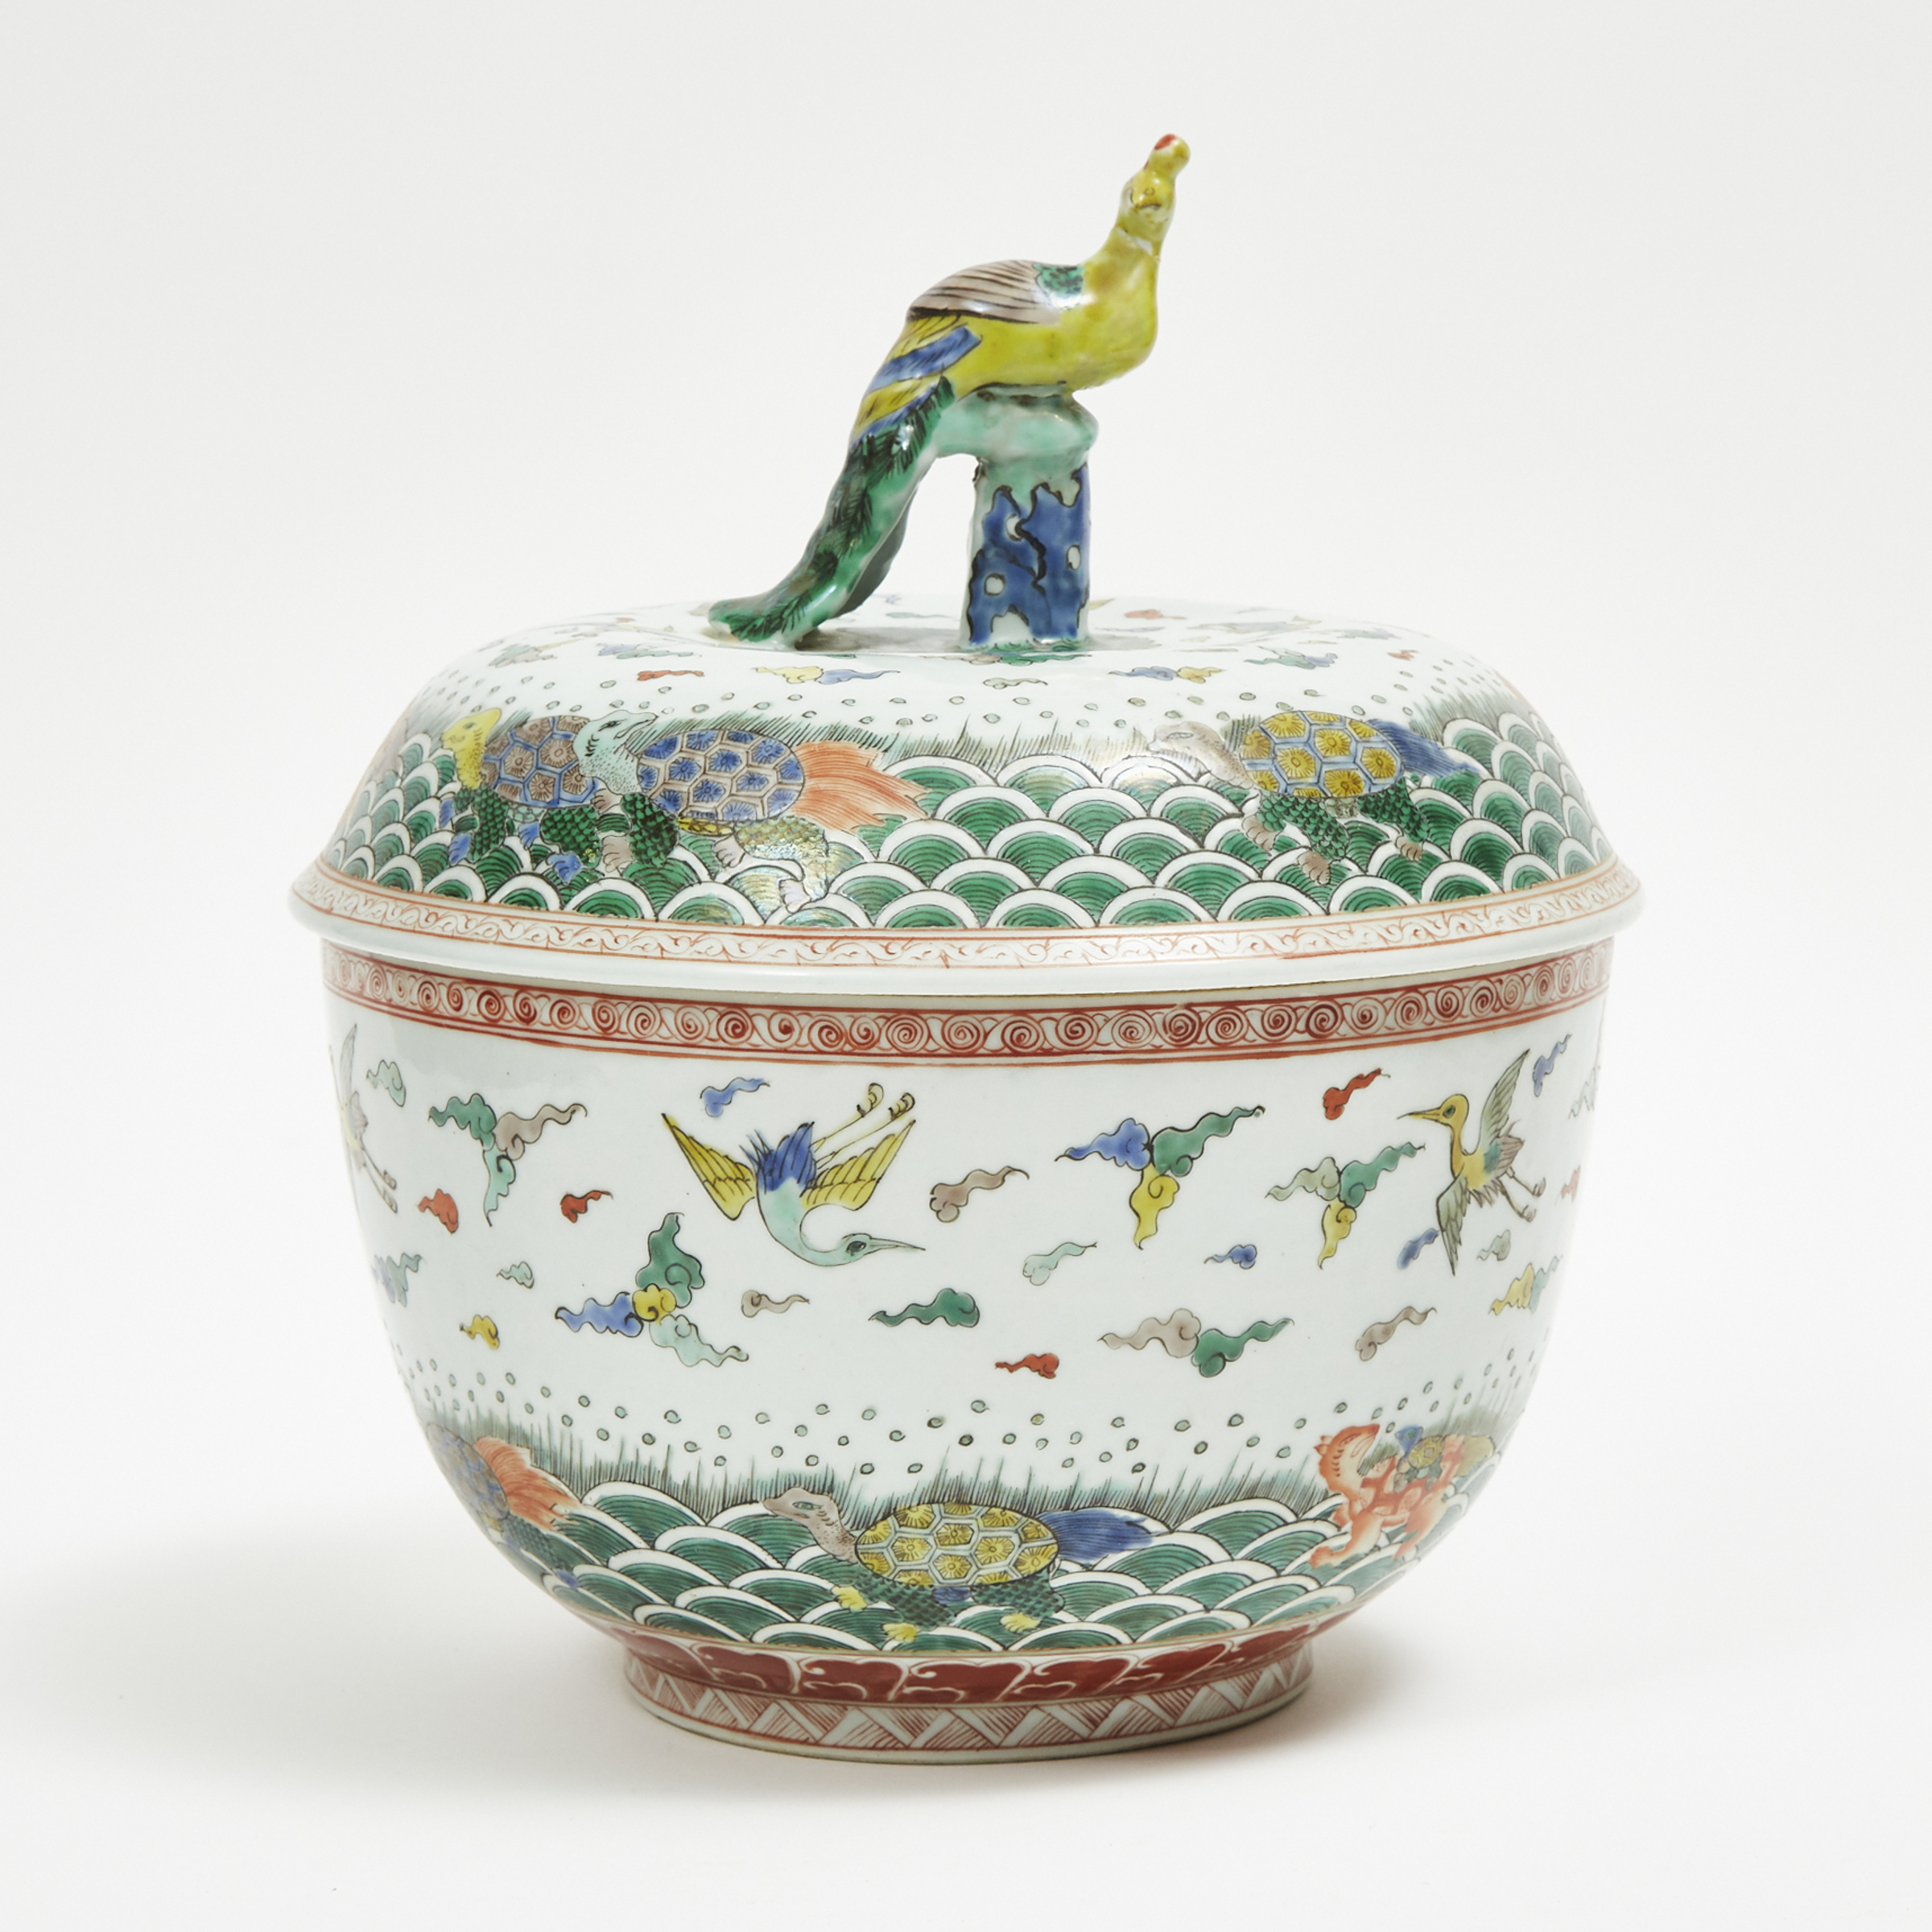 A Large Famille Rose 'Crane and Bird' Covered Jar, 19th Century or Later